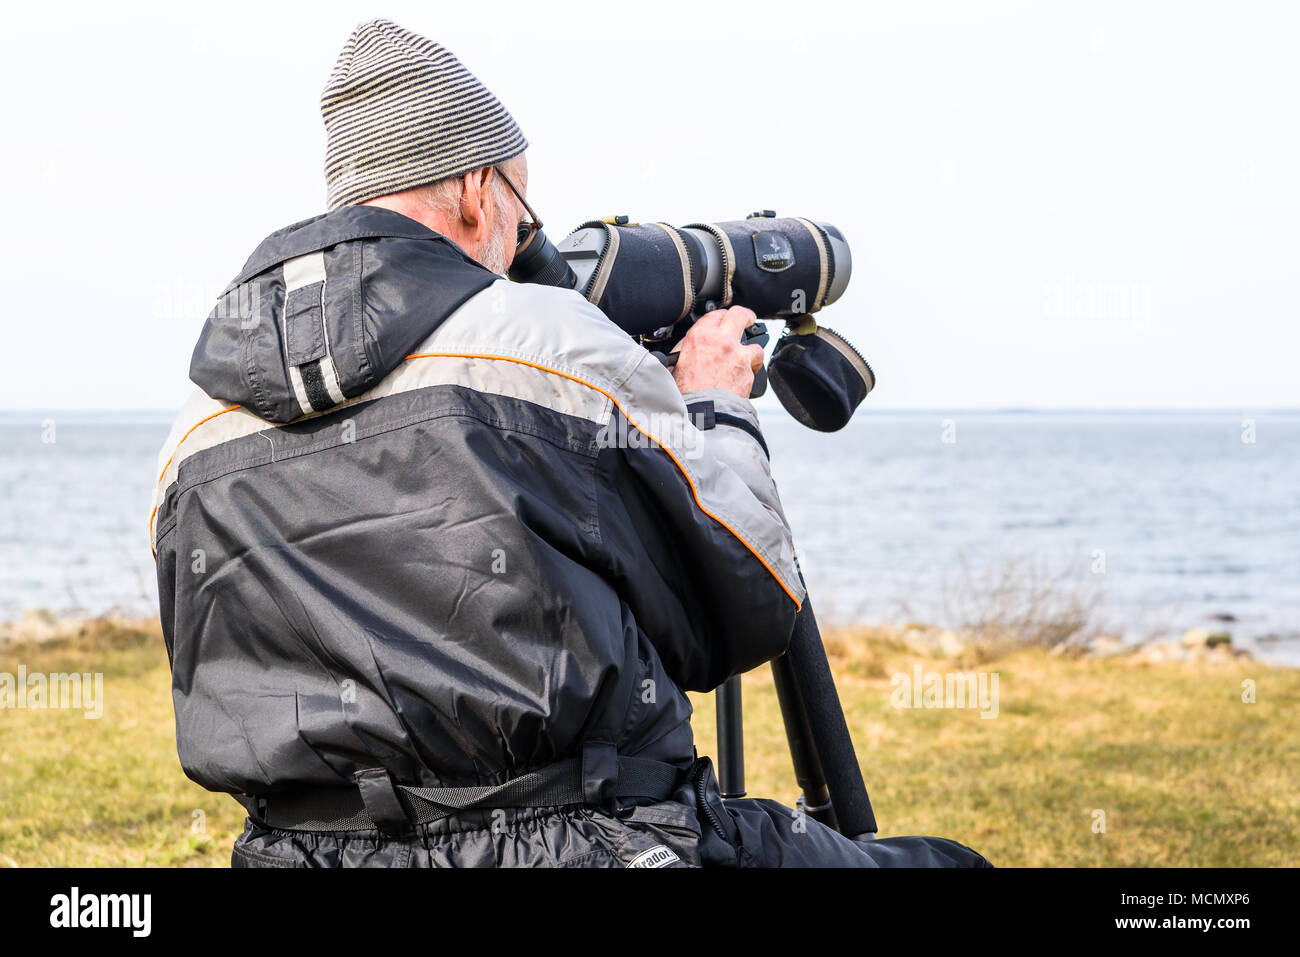 Stora ror, Sweden - April 7, 2018: Documentary of everyday life and environment. Senior male bird watcher looking for migrating birds returning in spr Stock Photo